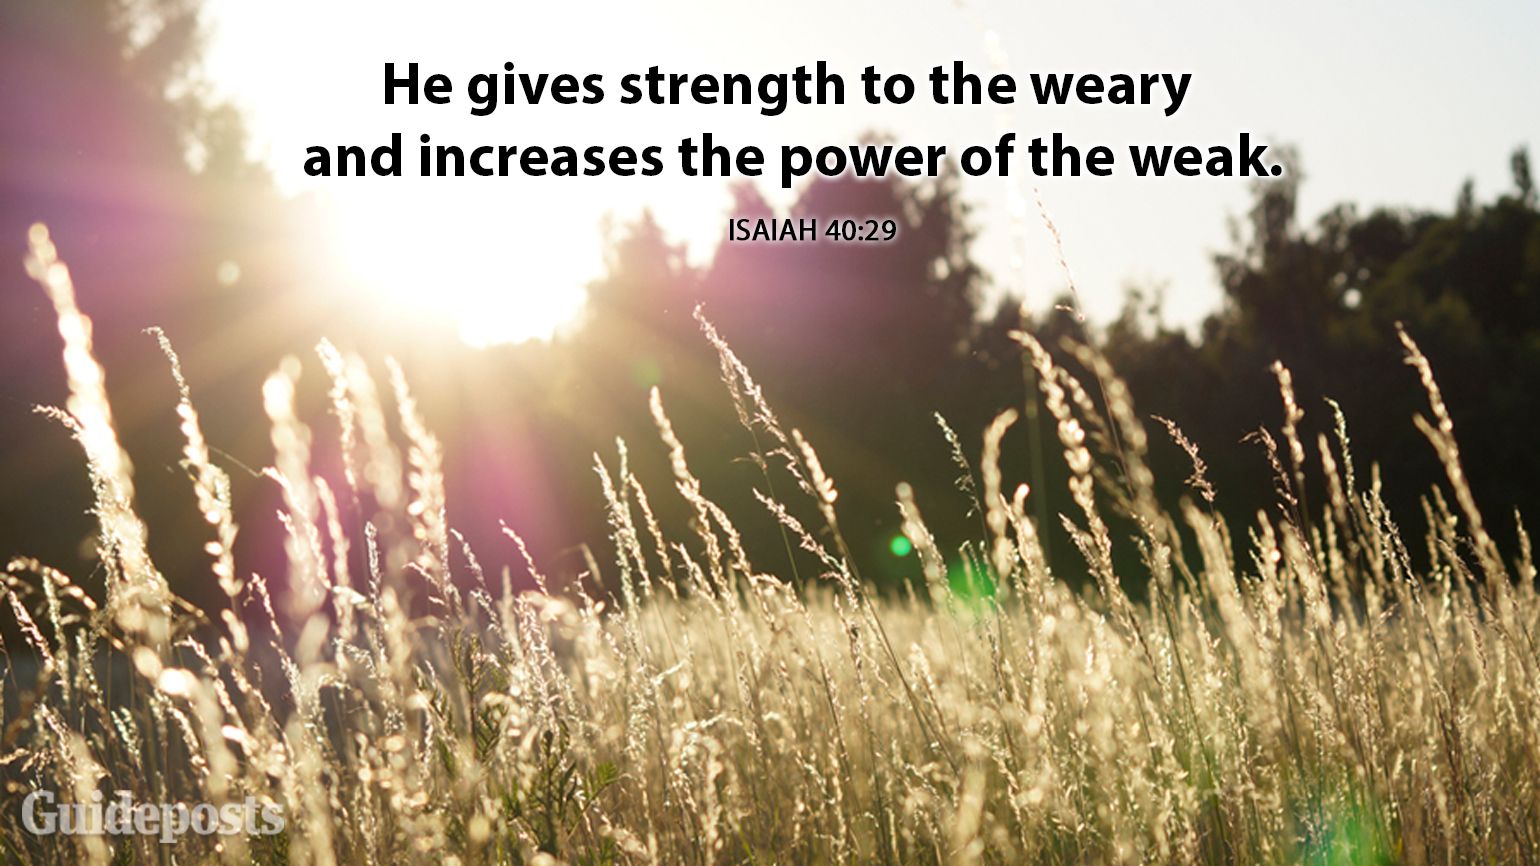 5 Bible Verses for Strength